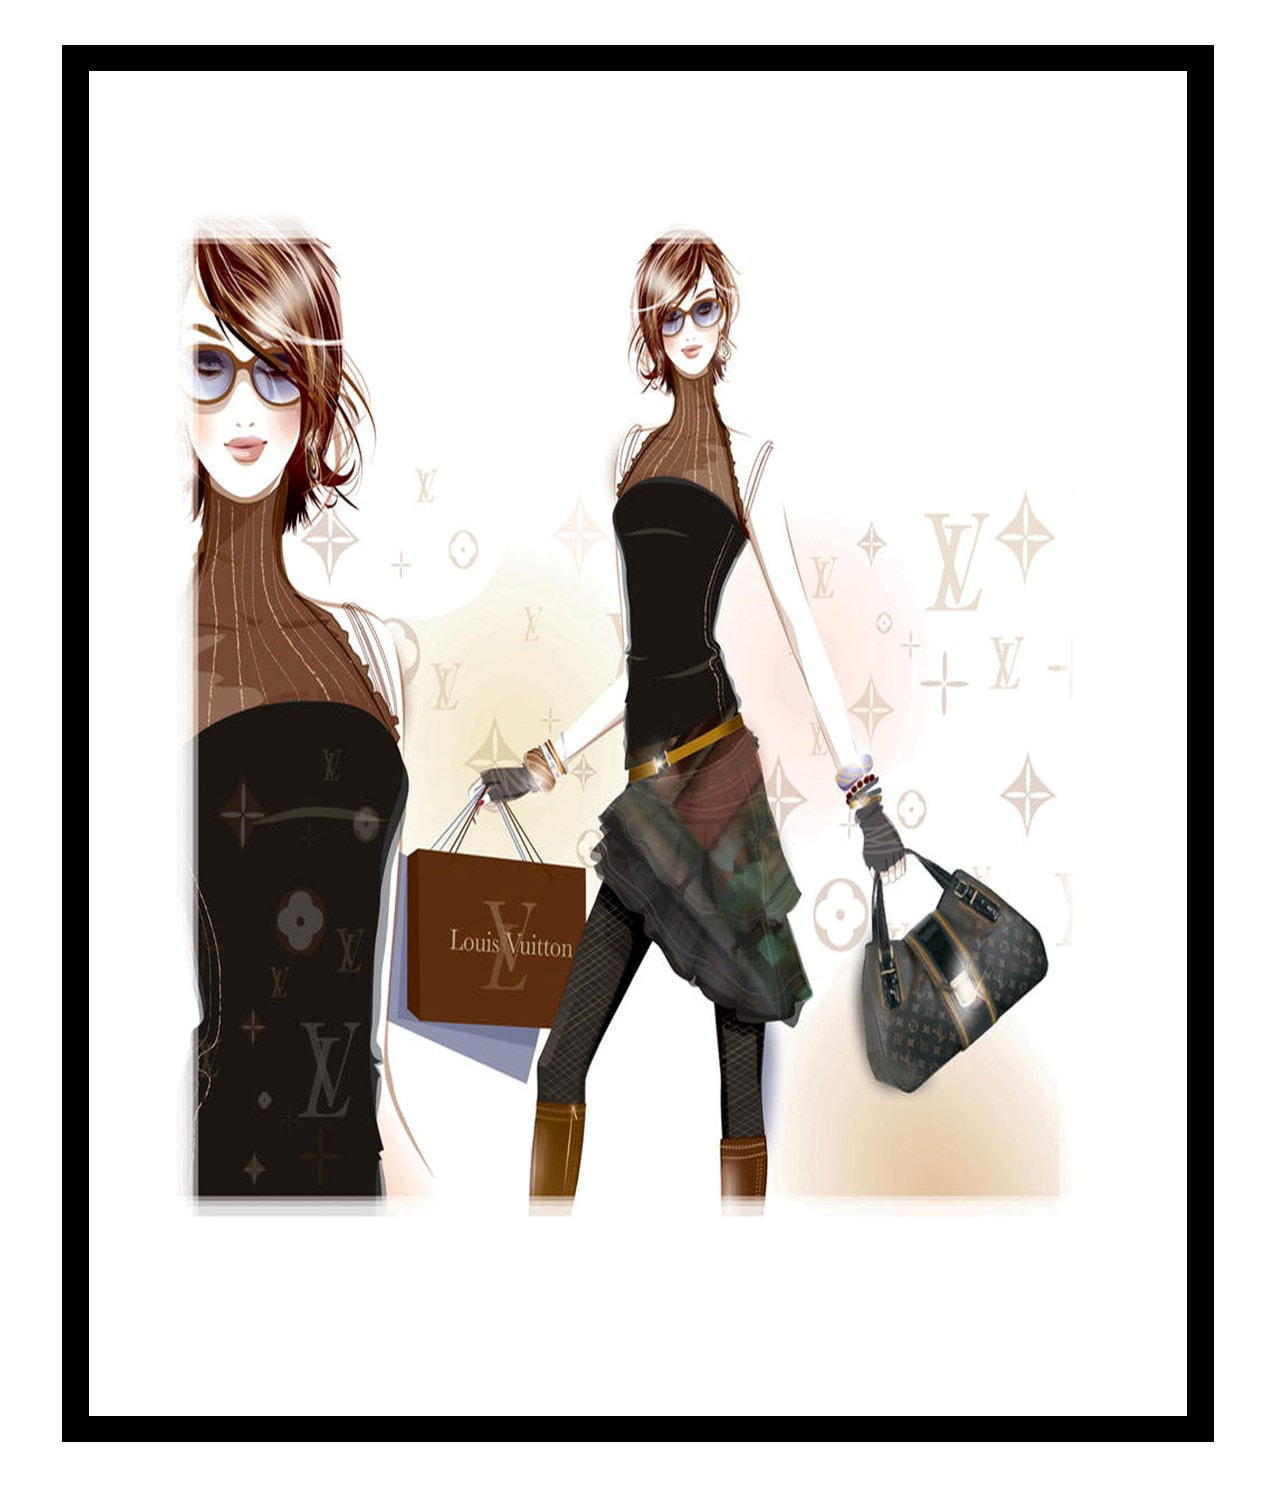 Louis Vuitton Purse inspired 8x10 Poster or Sign